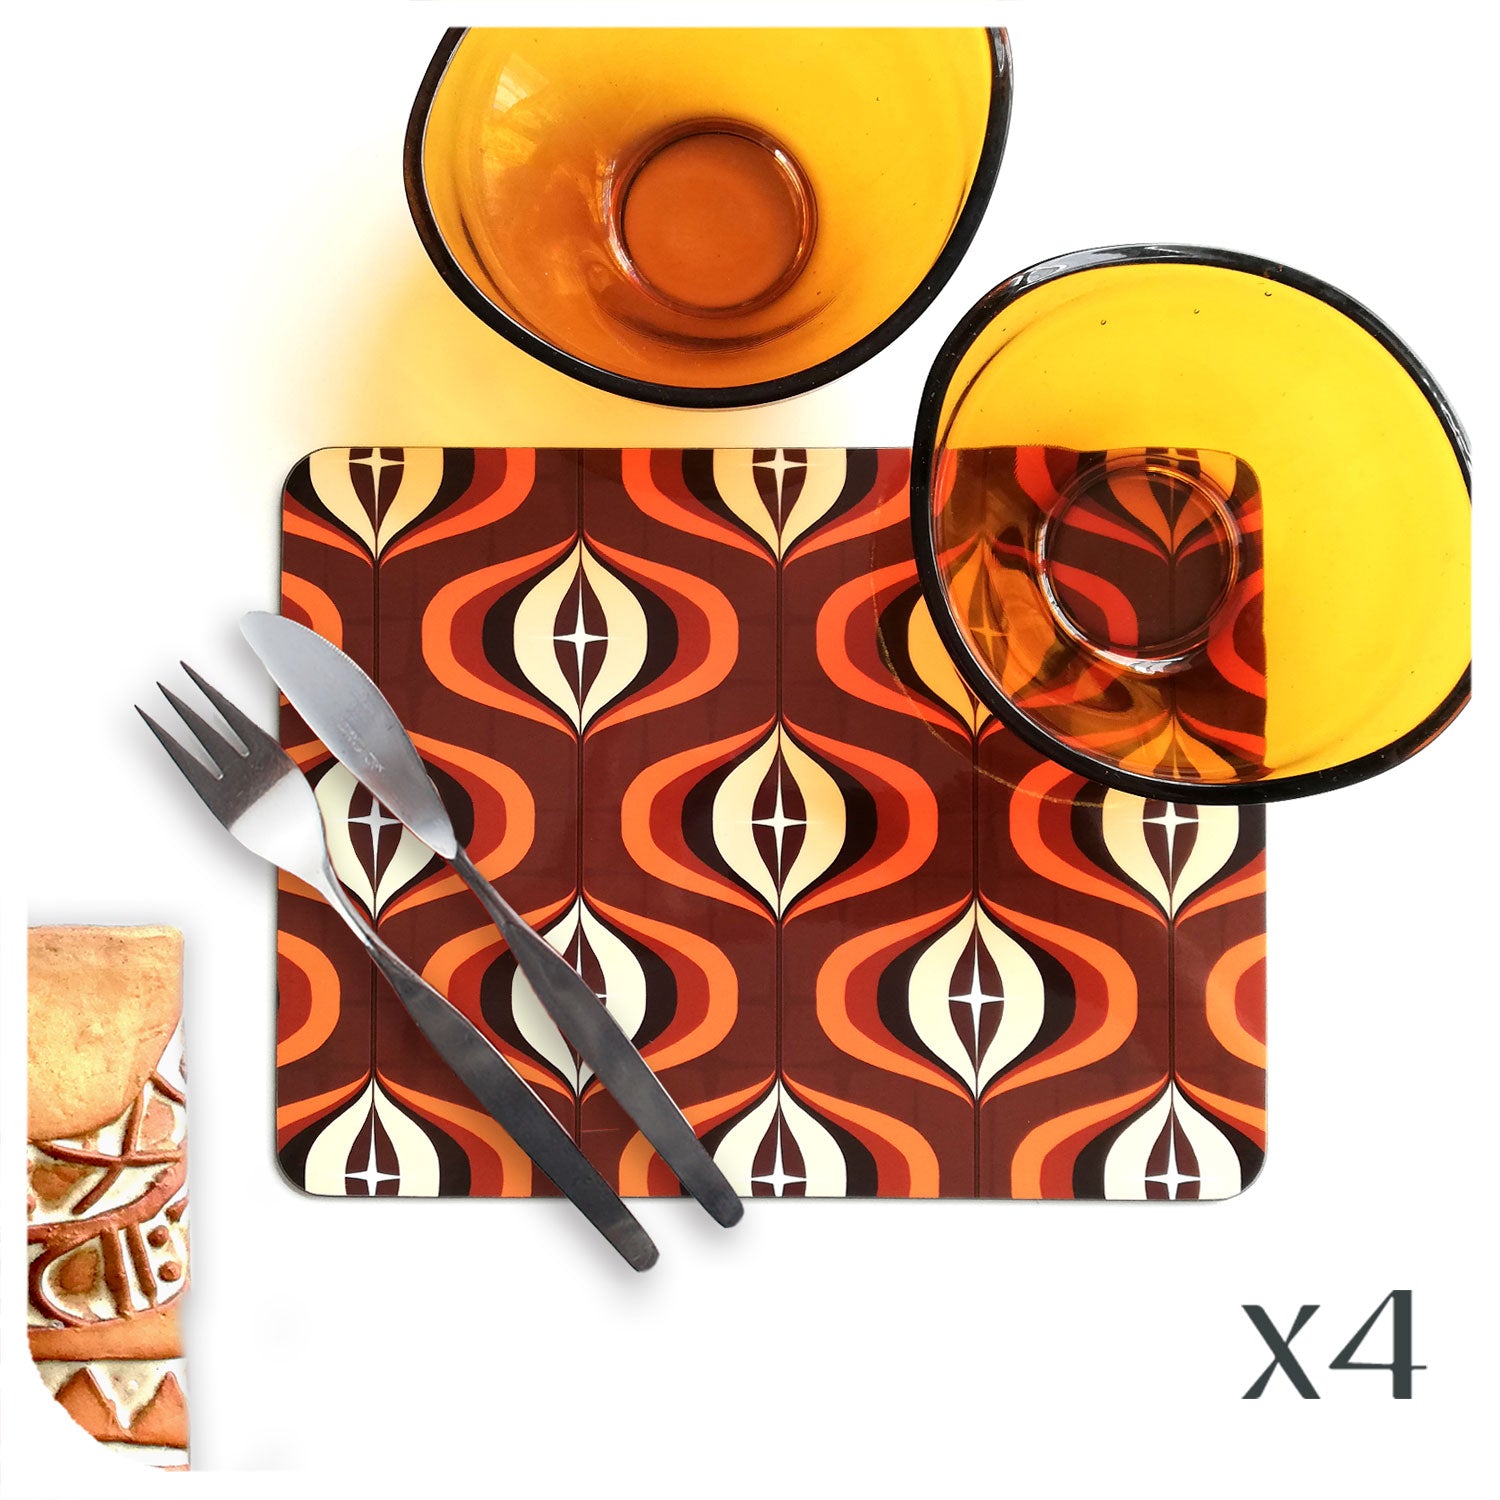 70s Style Op Art Placemat in Orange and Brown, set with vintage tableware | The Inkabilly Emporium